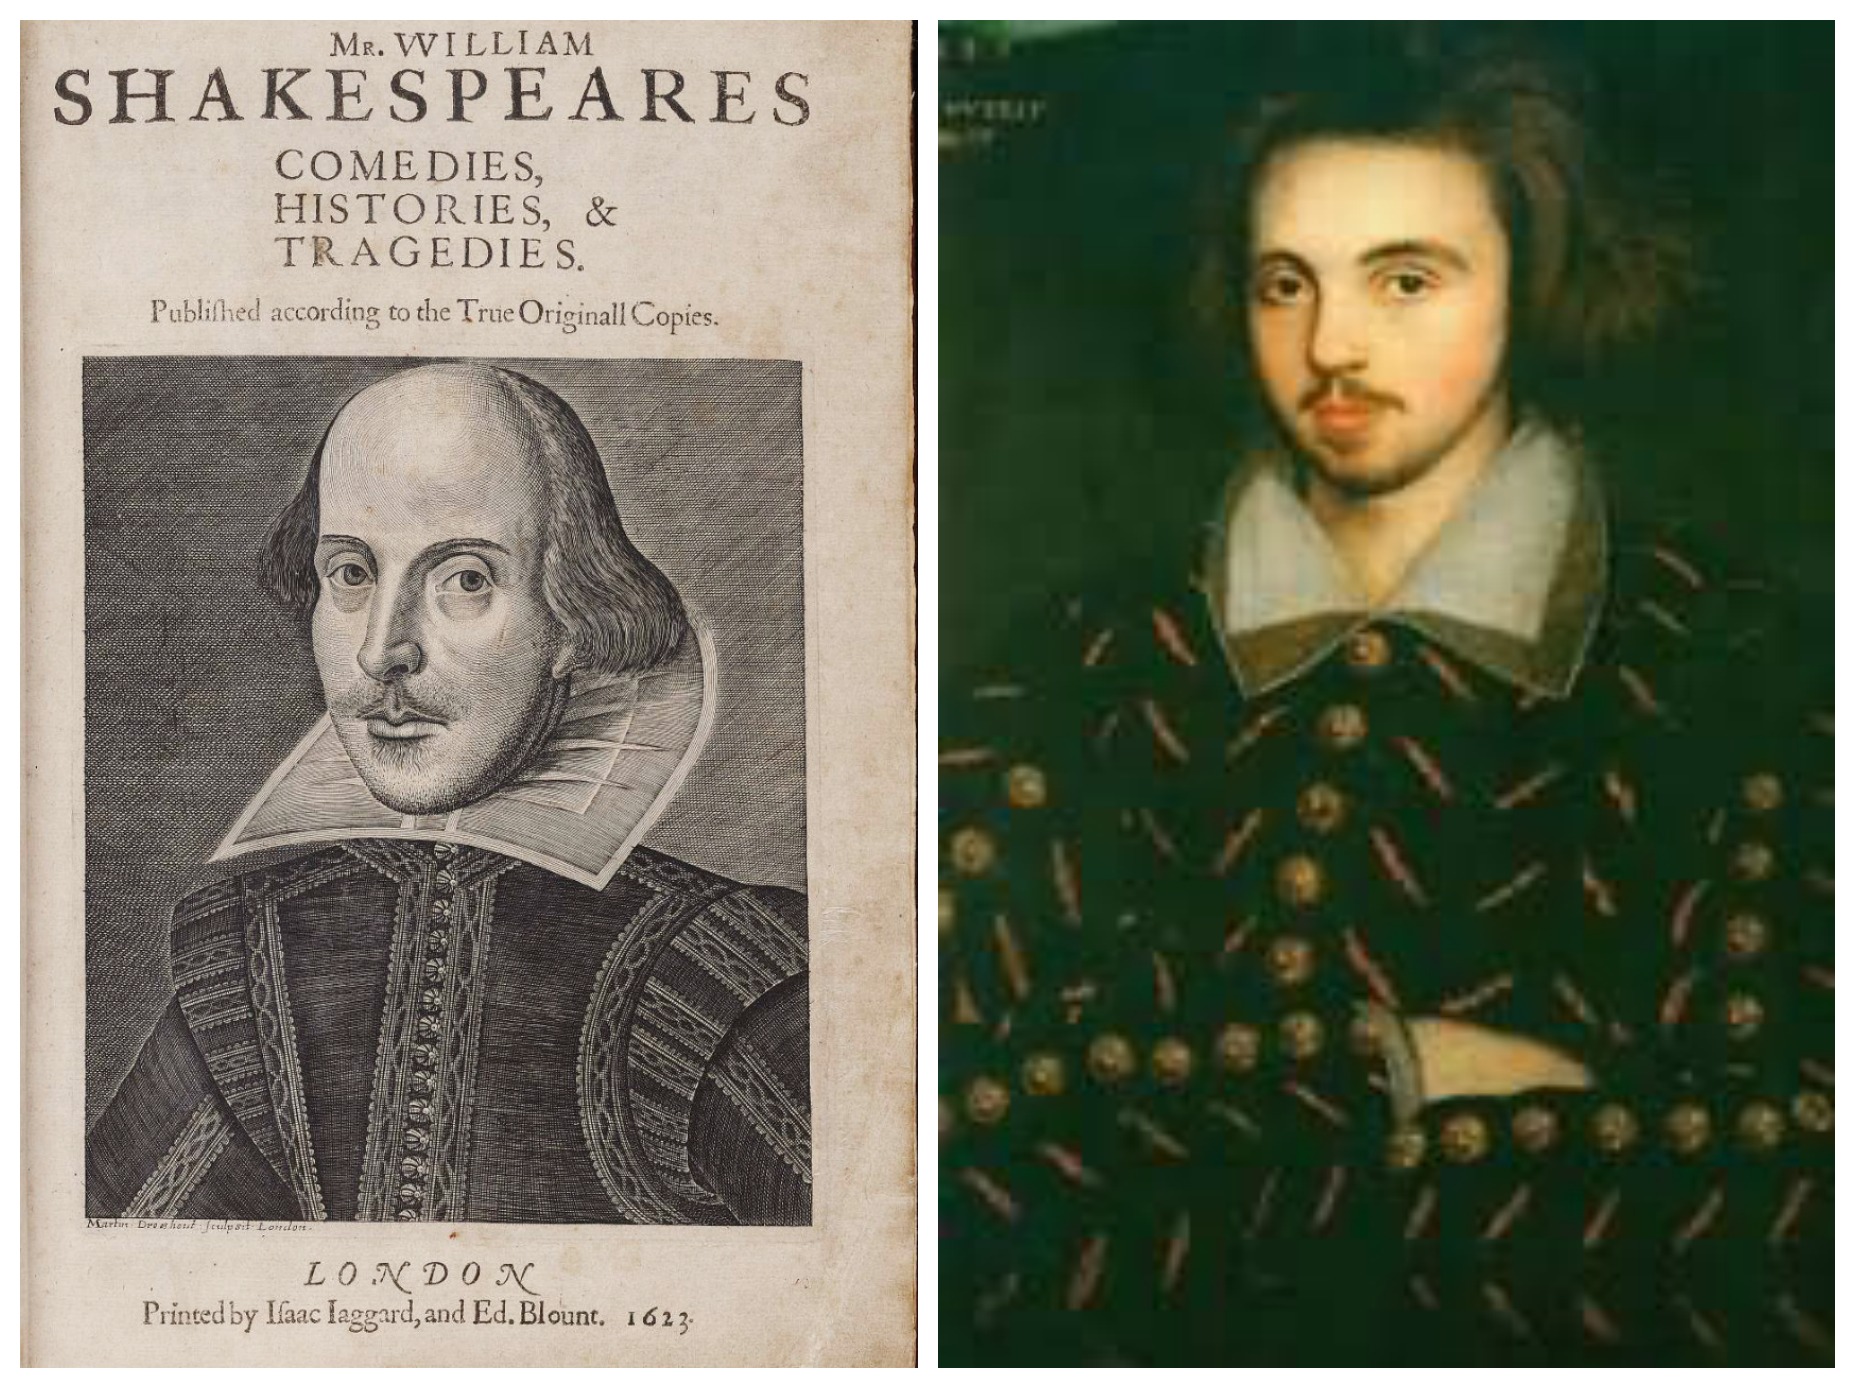 William Shakespeare and Christopher Marlowe